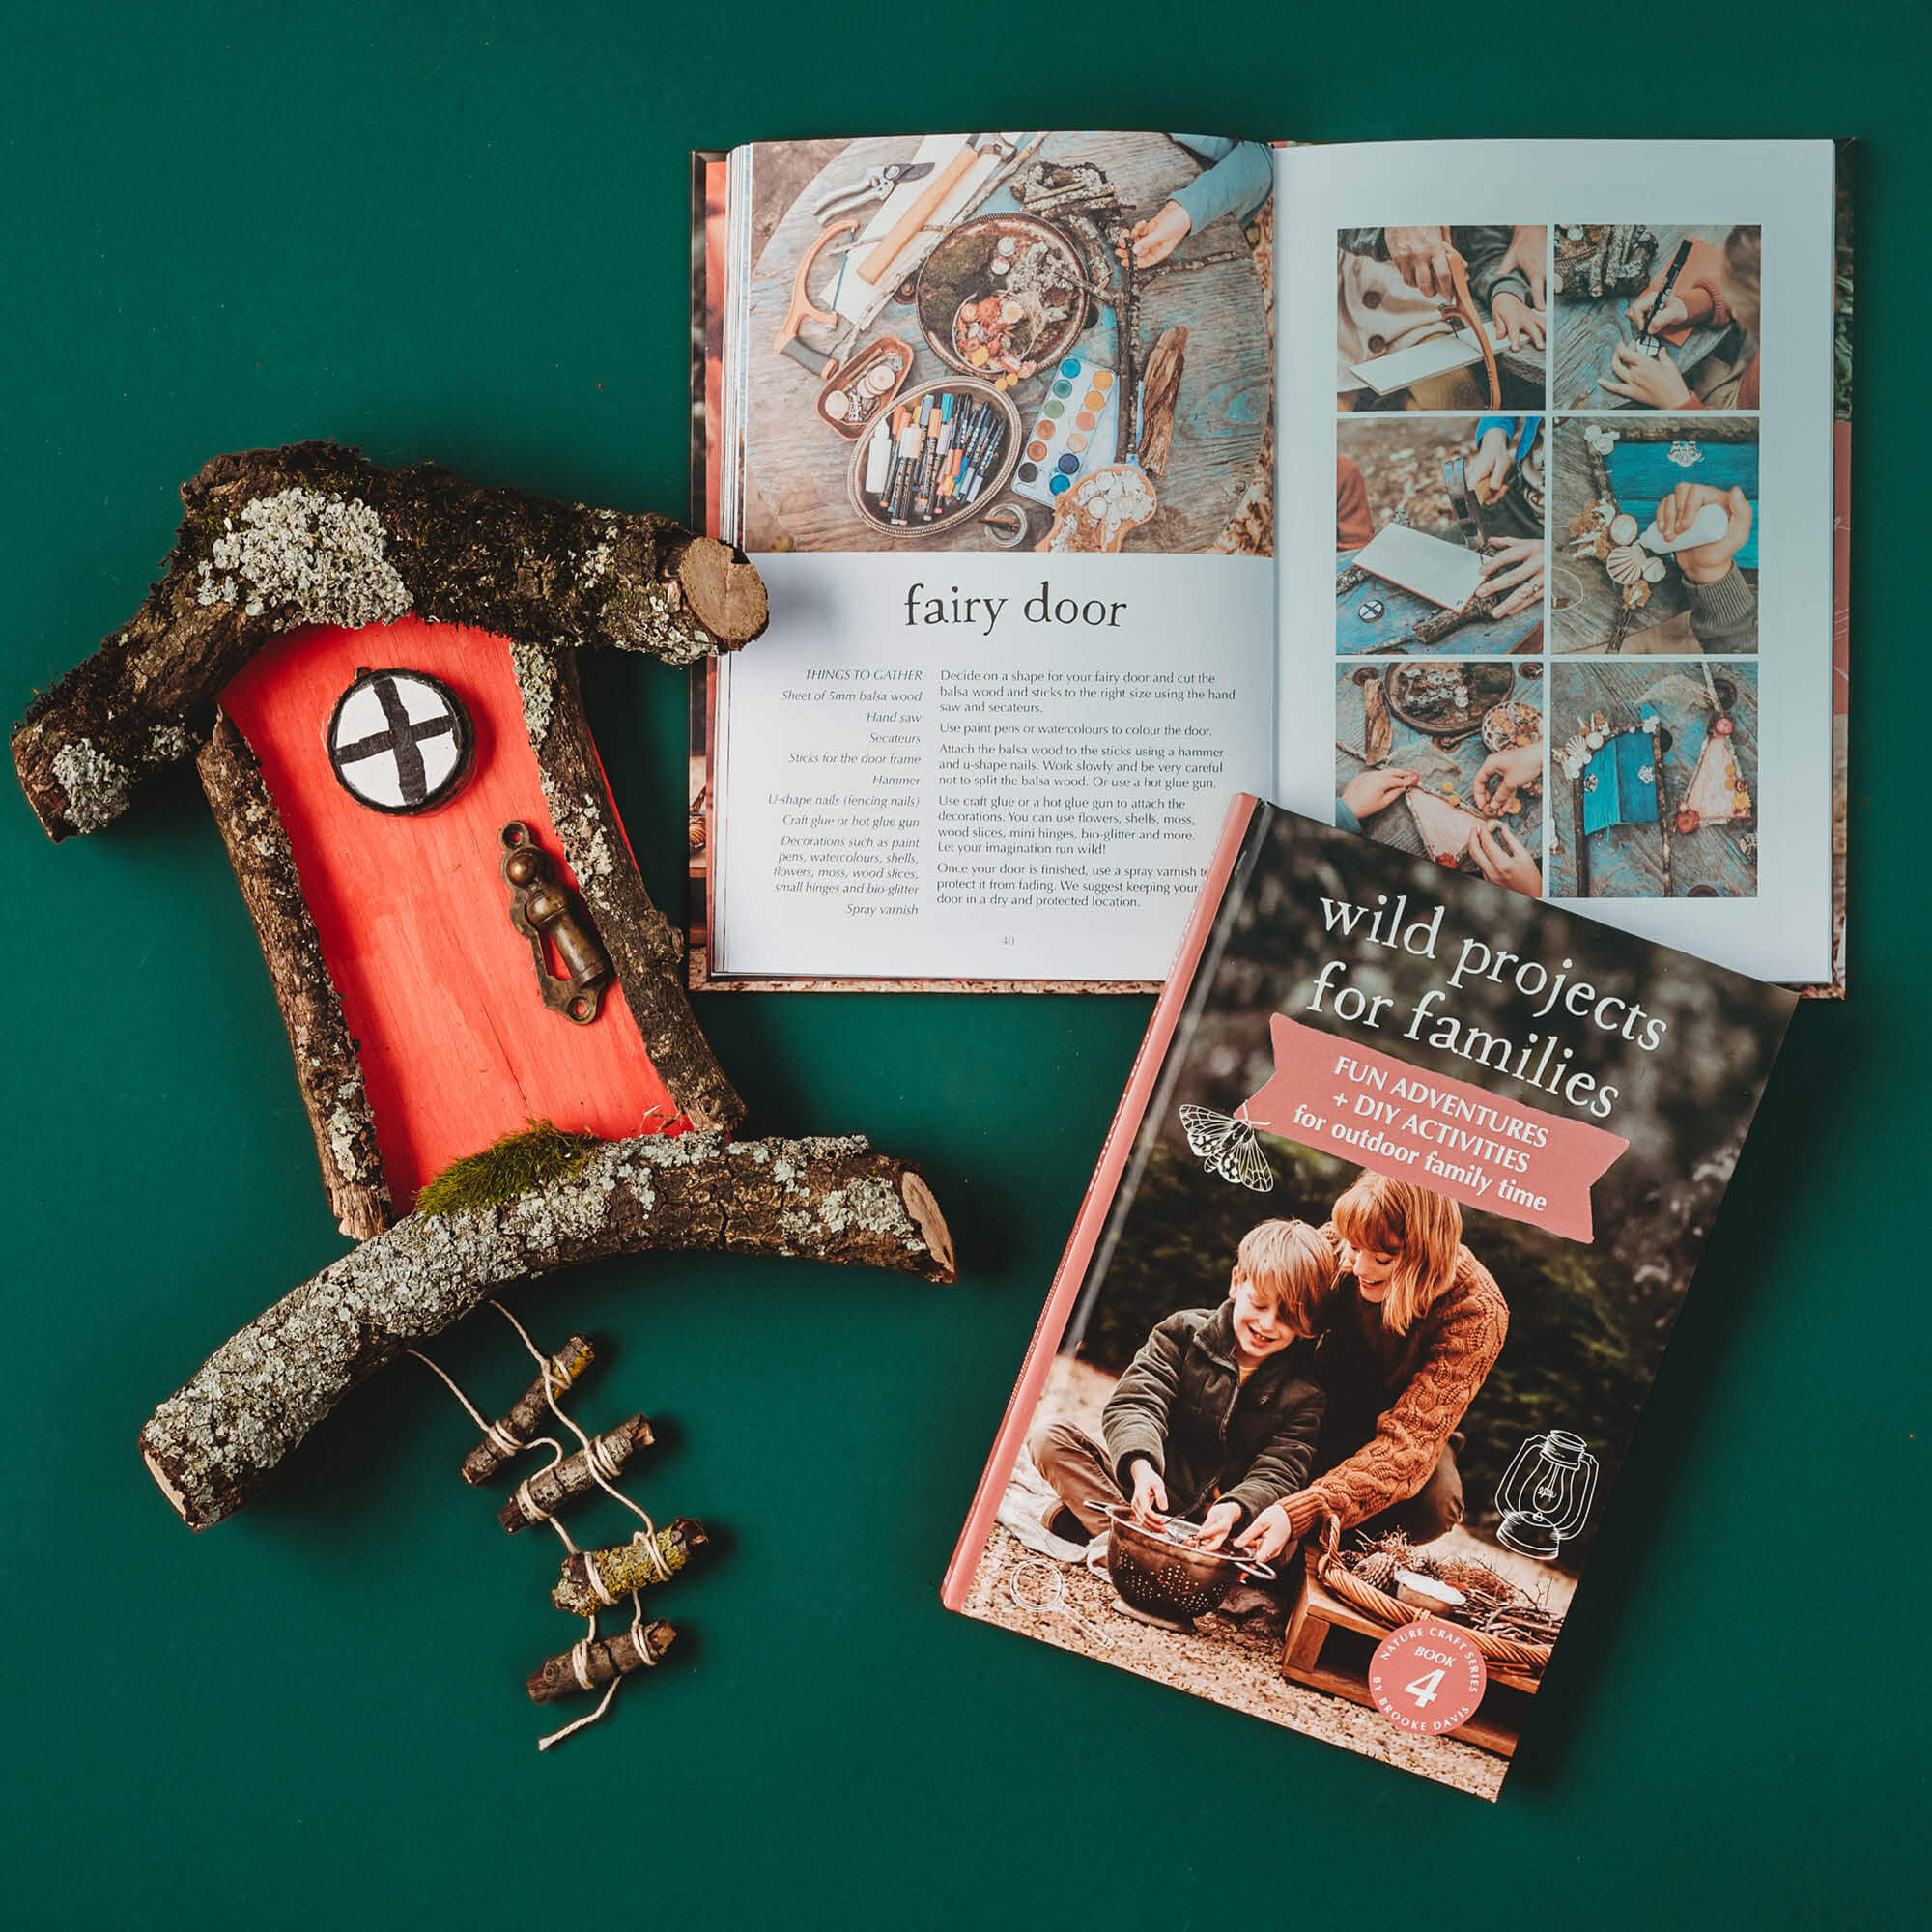 Pages from Real Tools Bundle by Your Wild Books includes Wild Projects for Families book, whittling knife, hand drill and fire starter.